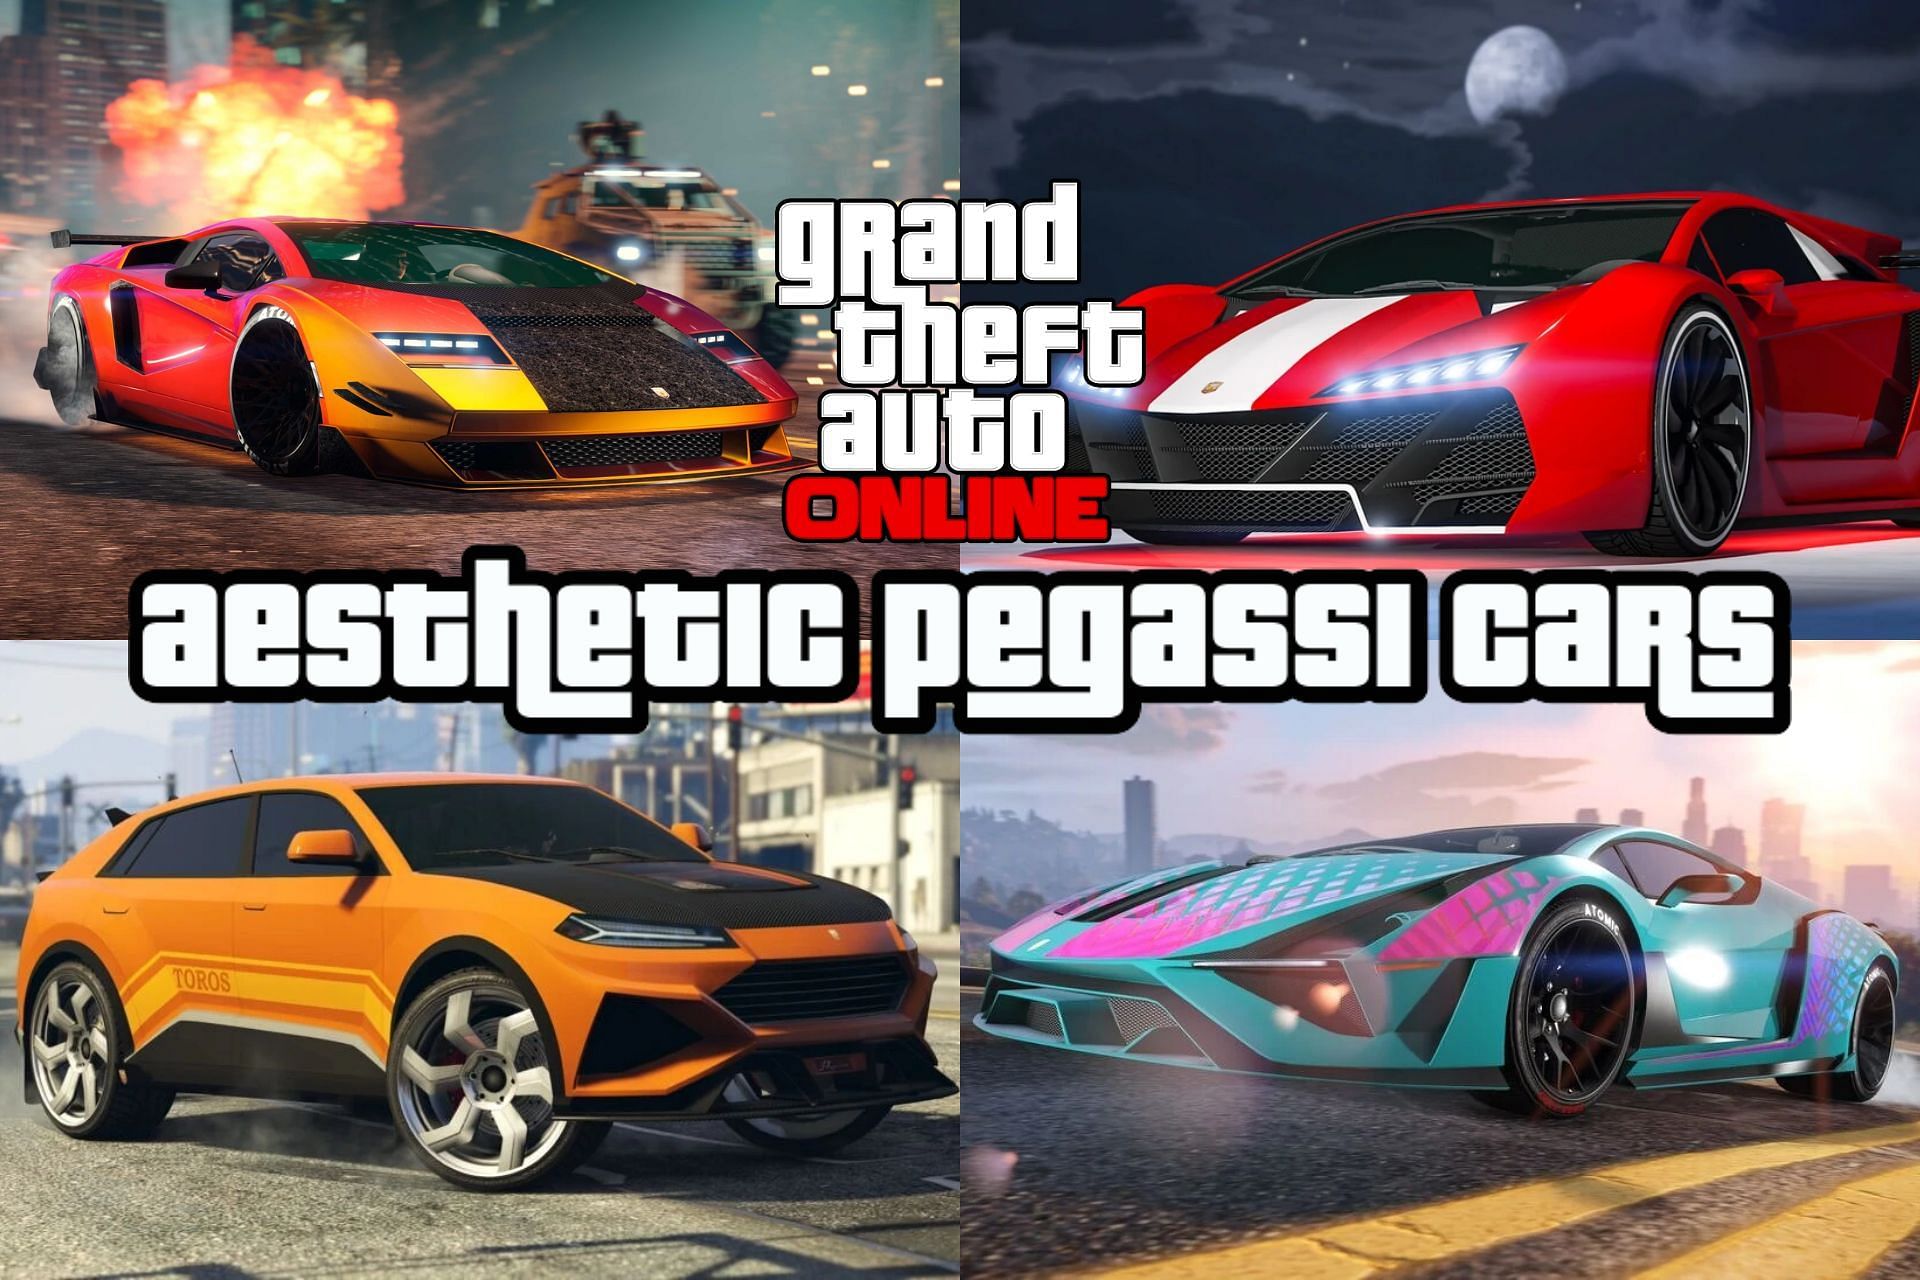 WATCH: GTA 5 Fan Discovers Insane Looking Lamborghinis in the Game -  EssentiallySports